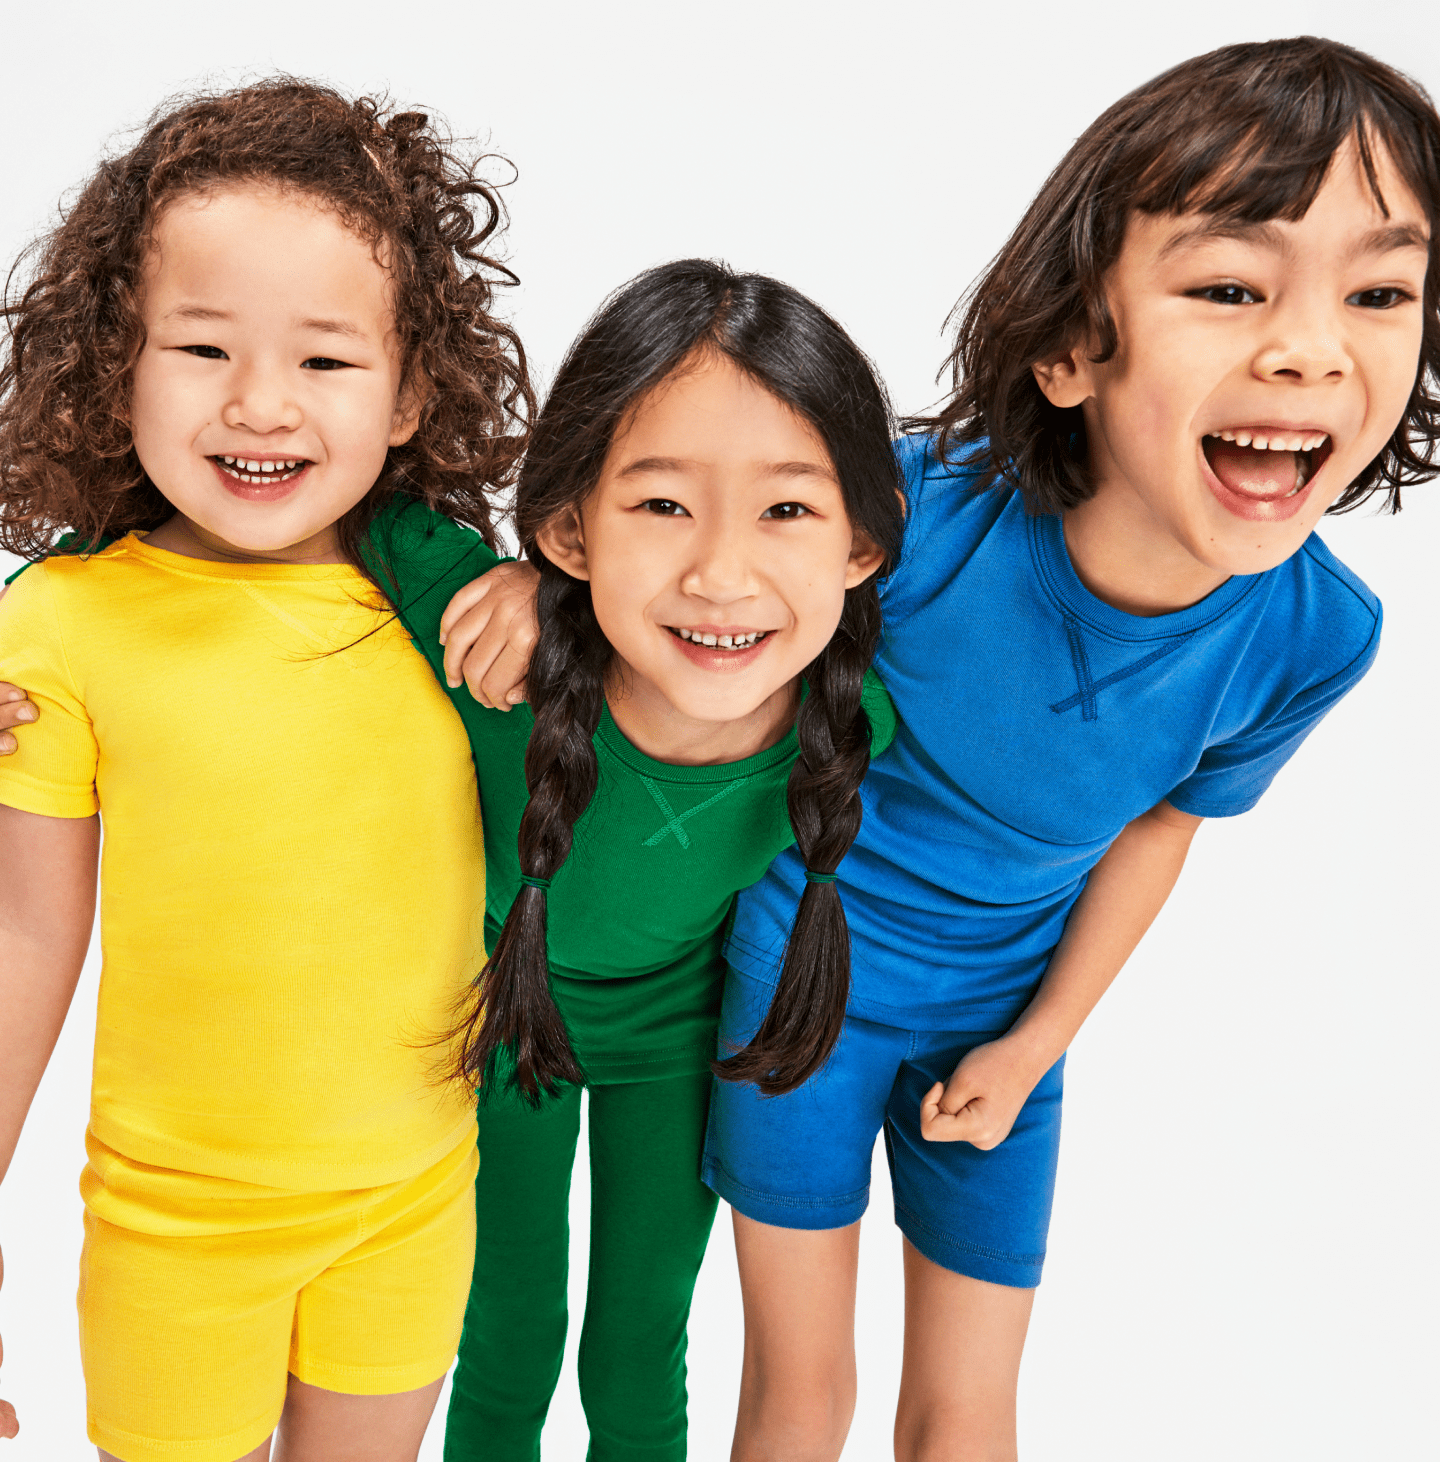 Three kids in pajamas happily laughing together